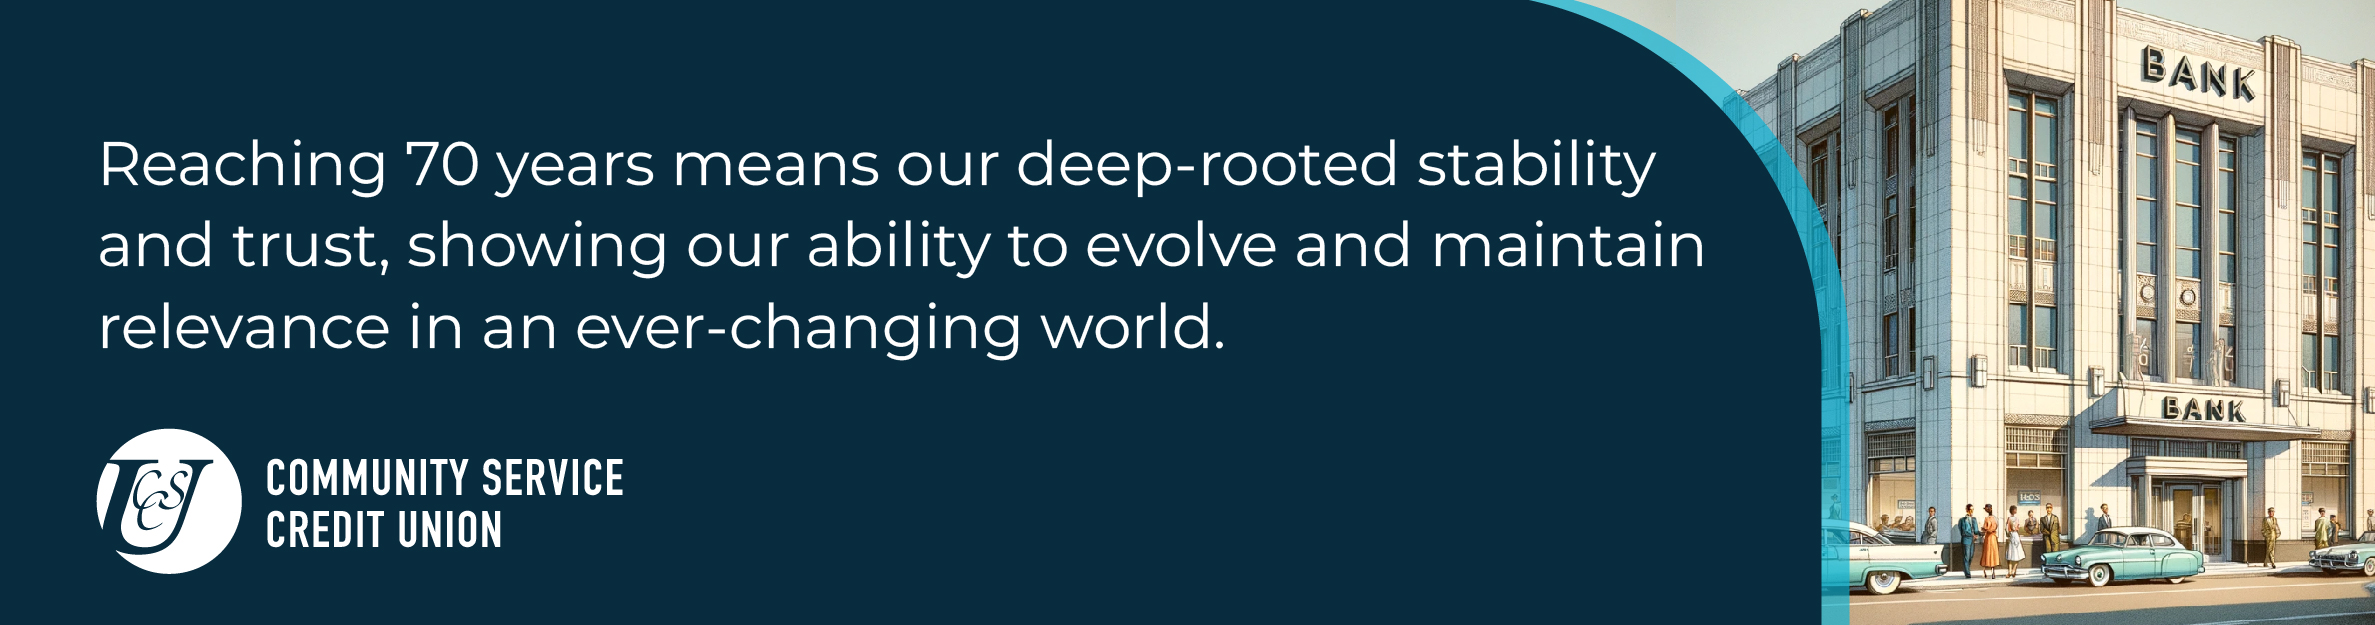 Reaching 70 years means our deep-rooted stability and trust, showing our stability and trust, showing our ability to evolve and maintain relevance in an ever-changing world. 